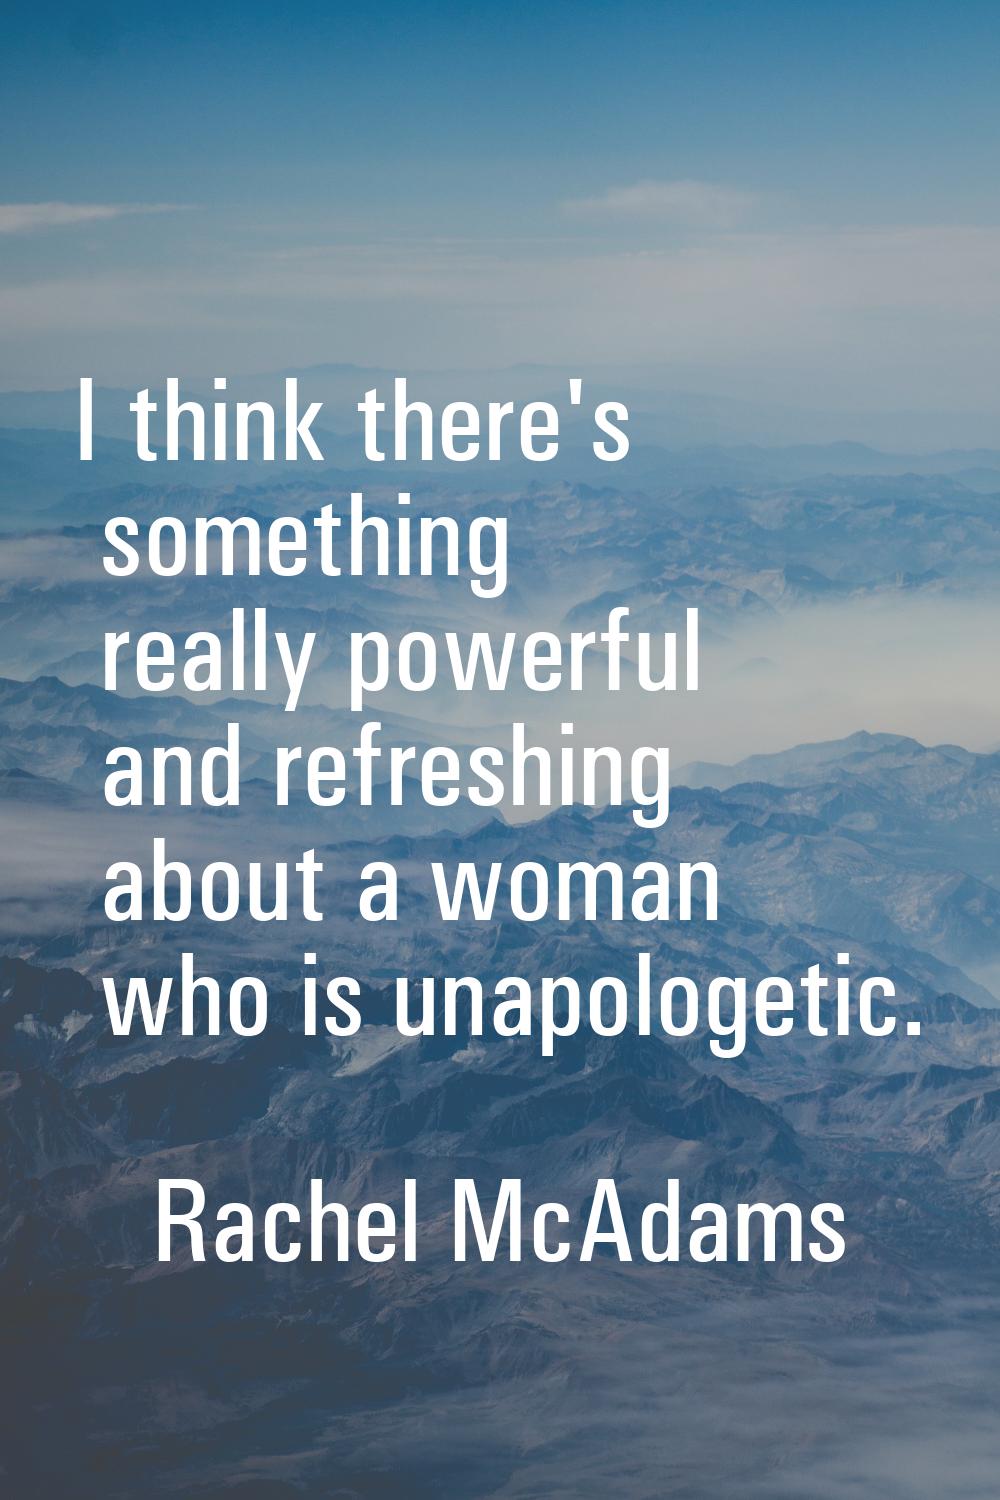 I think there's something really powerful and refreshing about a woman who is unapologetic.